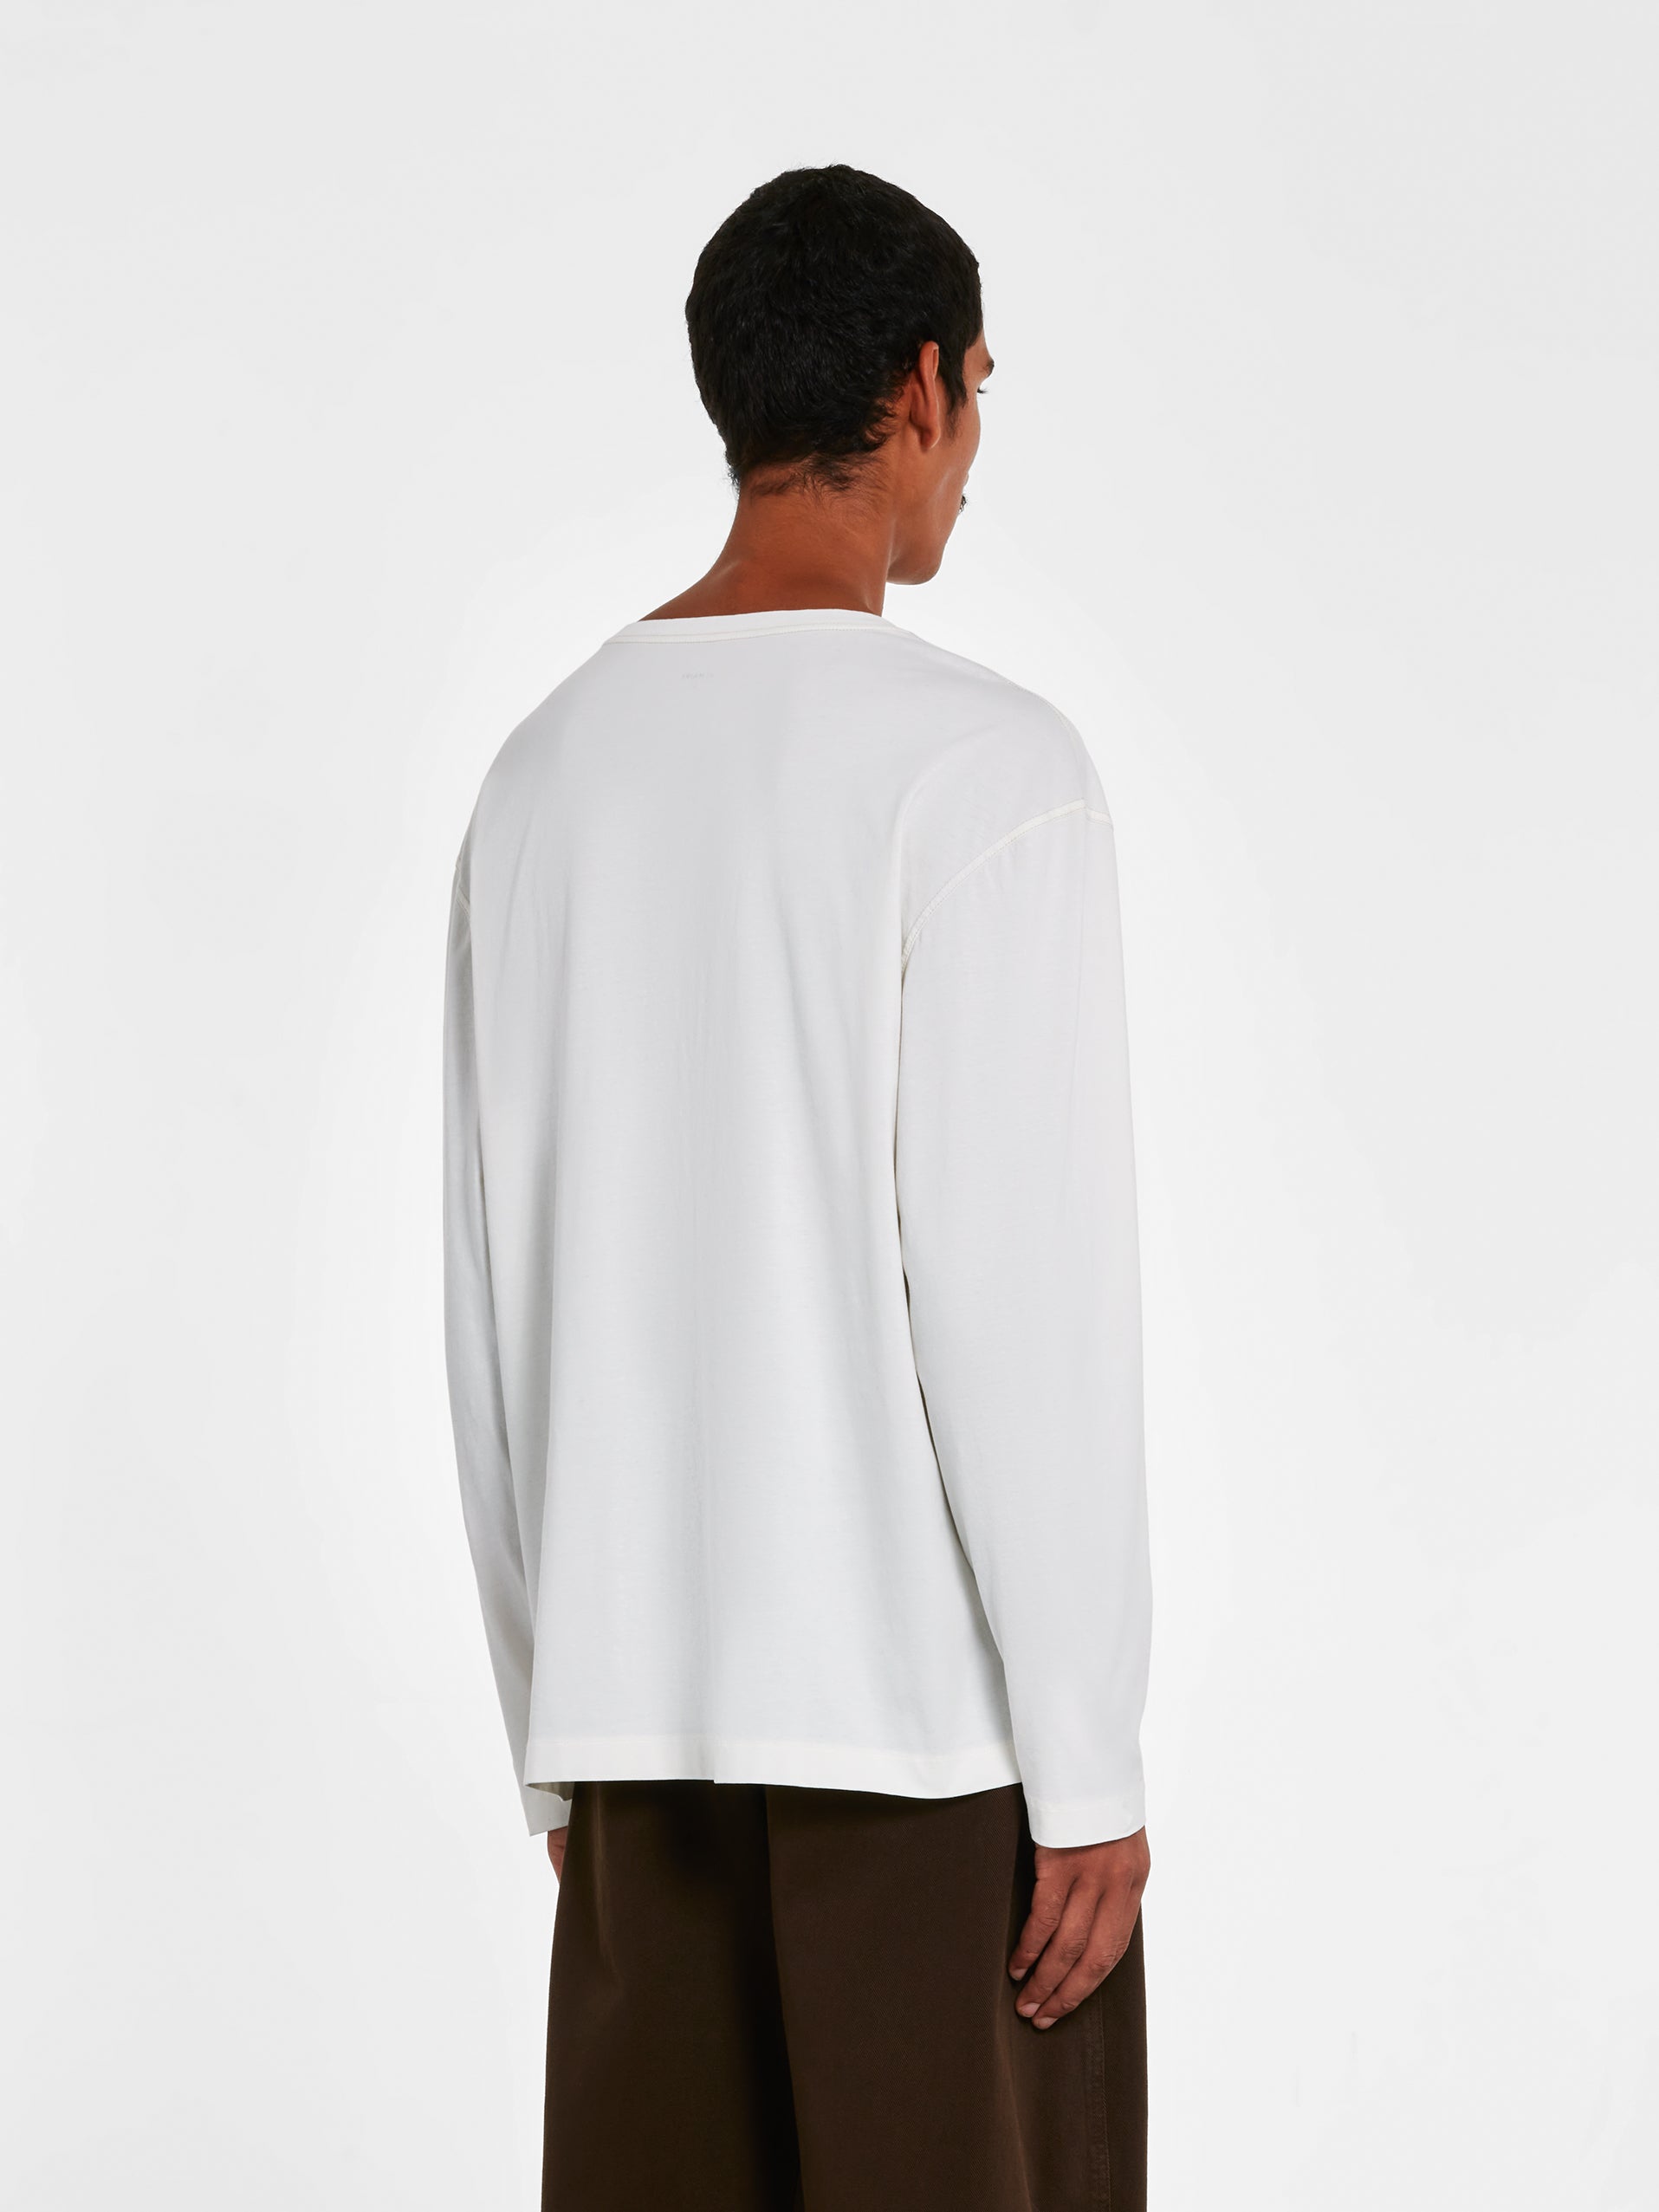 Lemaire - Men’s Long Sleeve Patch Pocket T-Shirt - (White) view 3